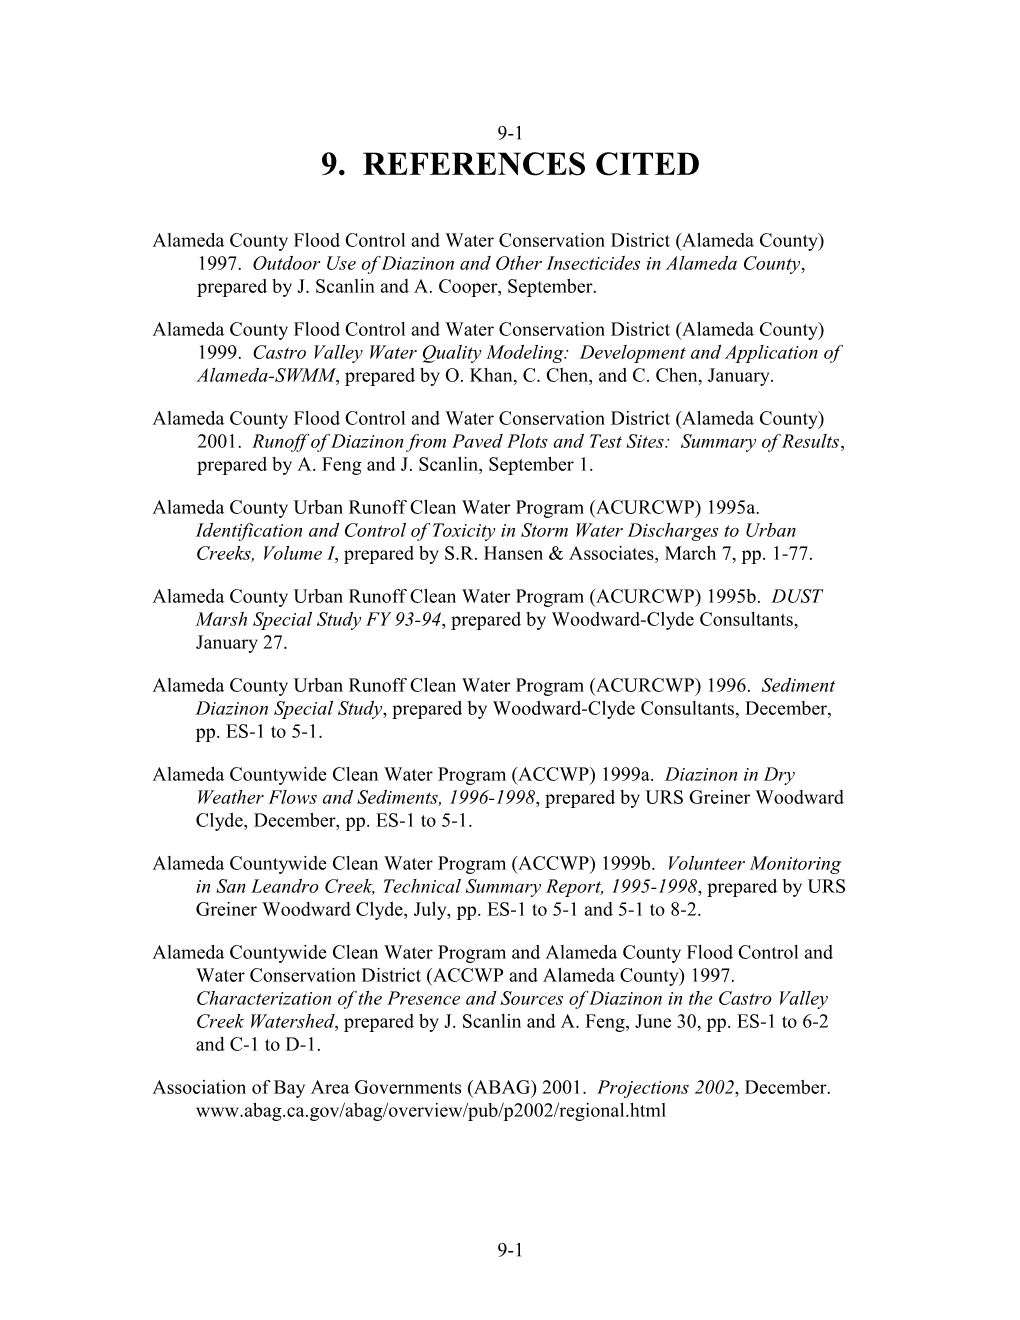 9. References Cited